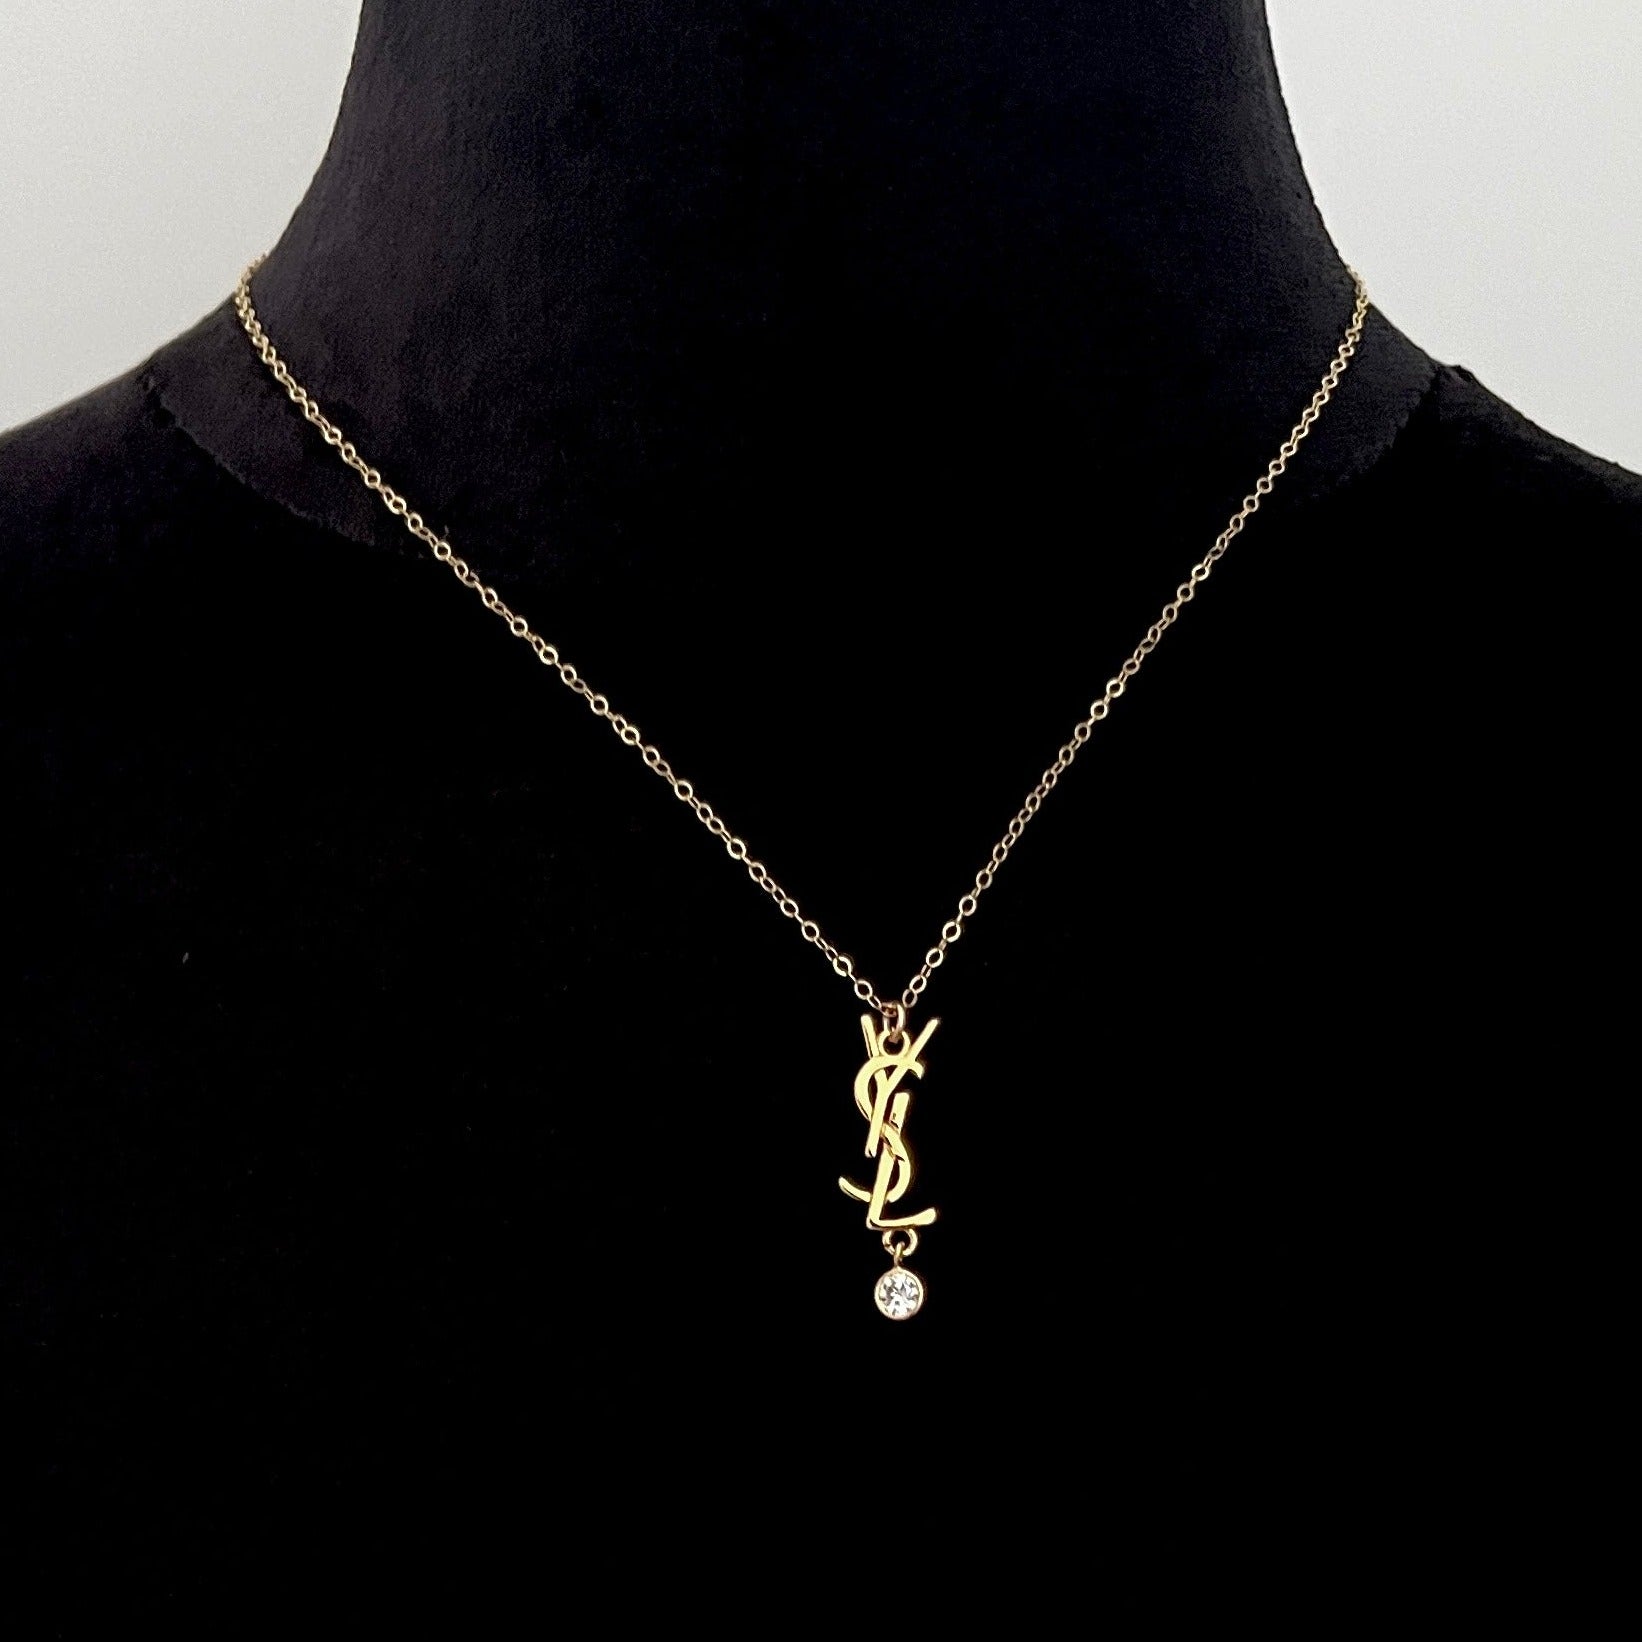 Gold Logo Necklace with Rhinestone Drop